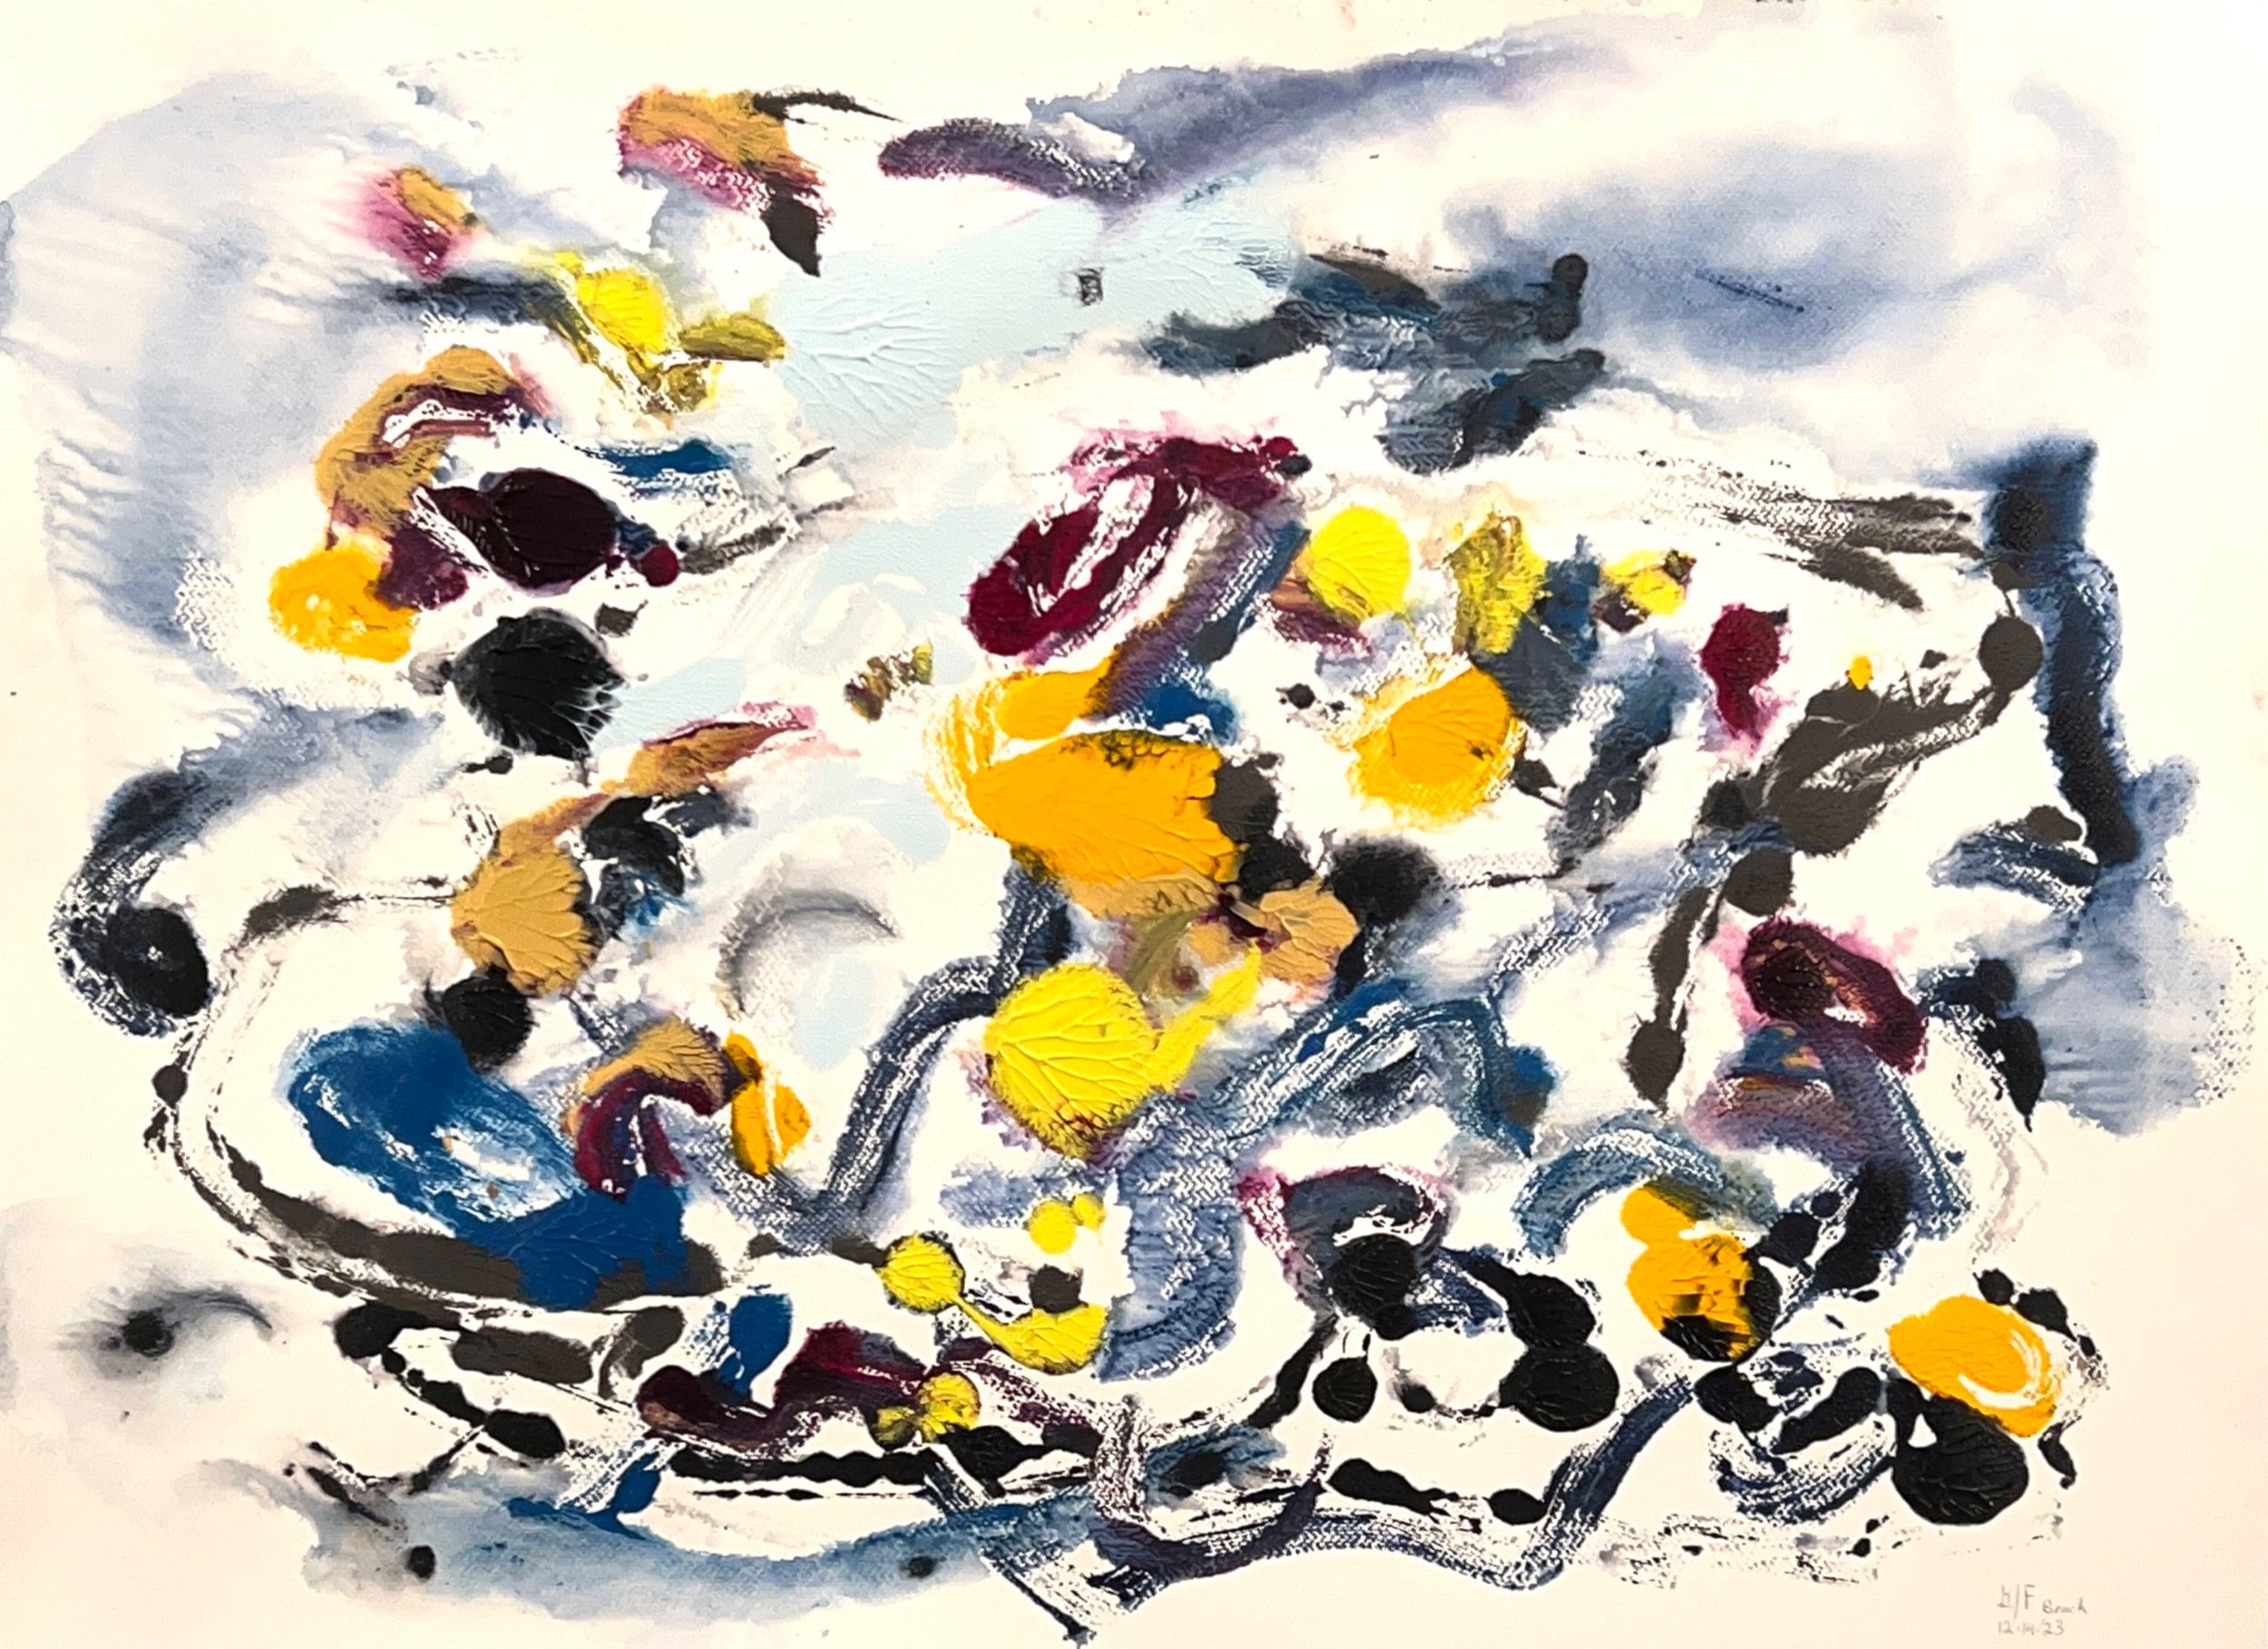 “Beach,” acrylic on Fabriano watercolor paper, 22”x 30”(12-14-‘23)